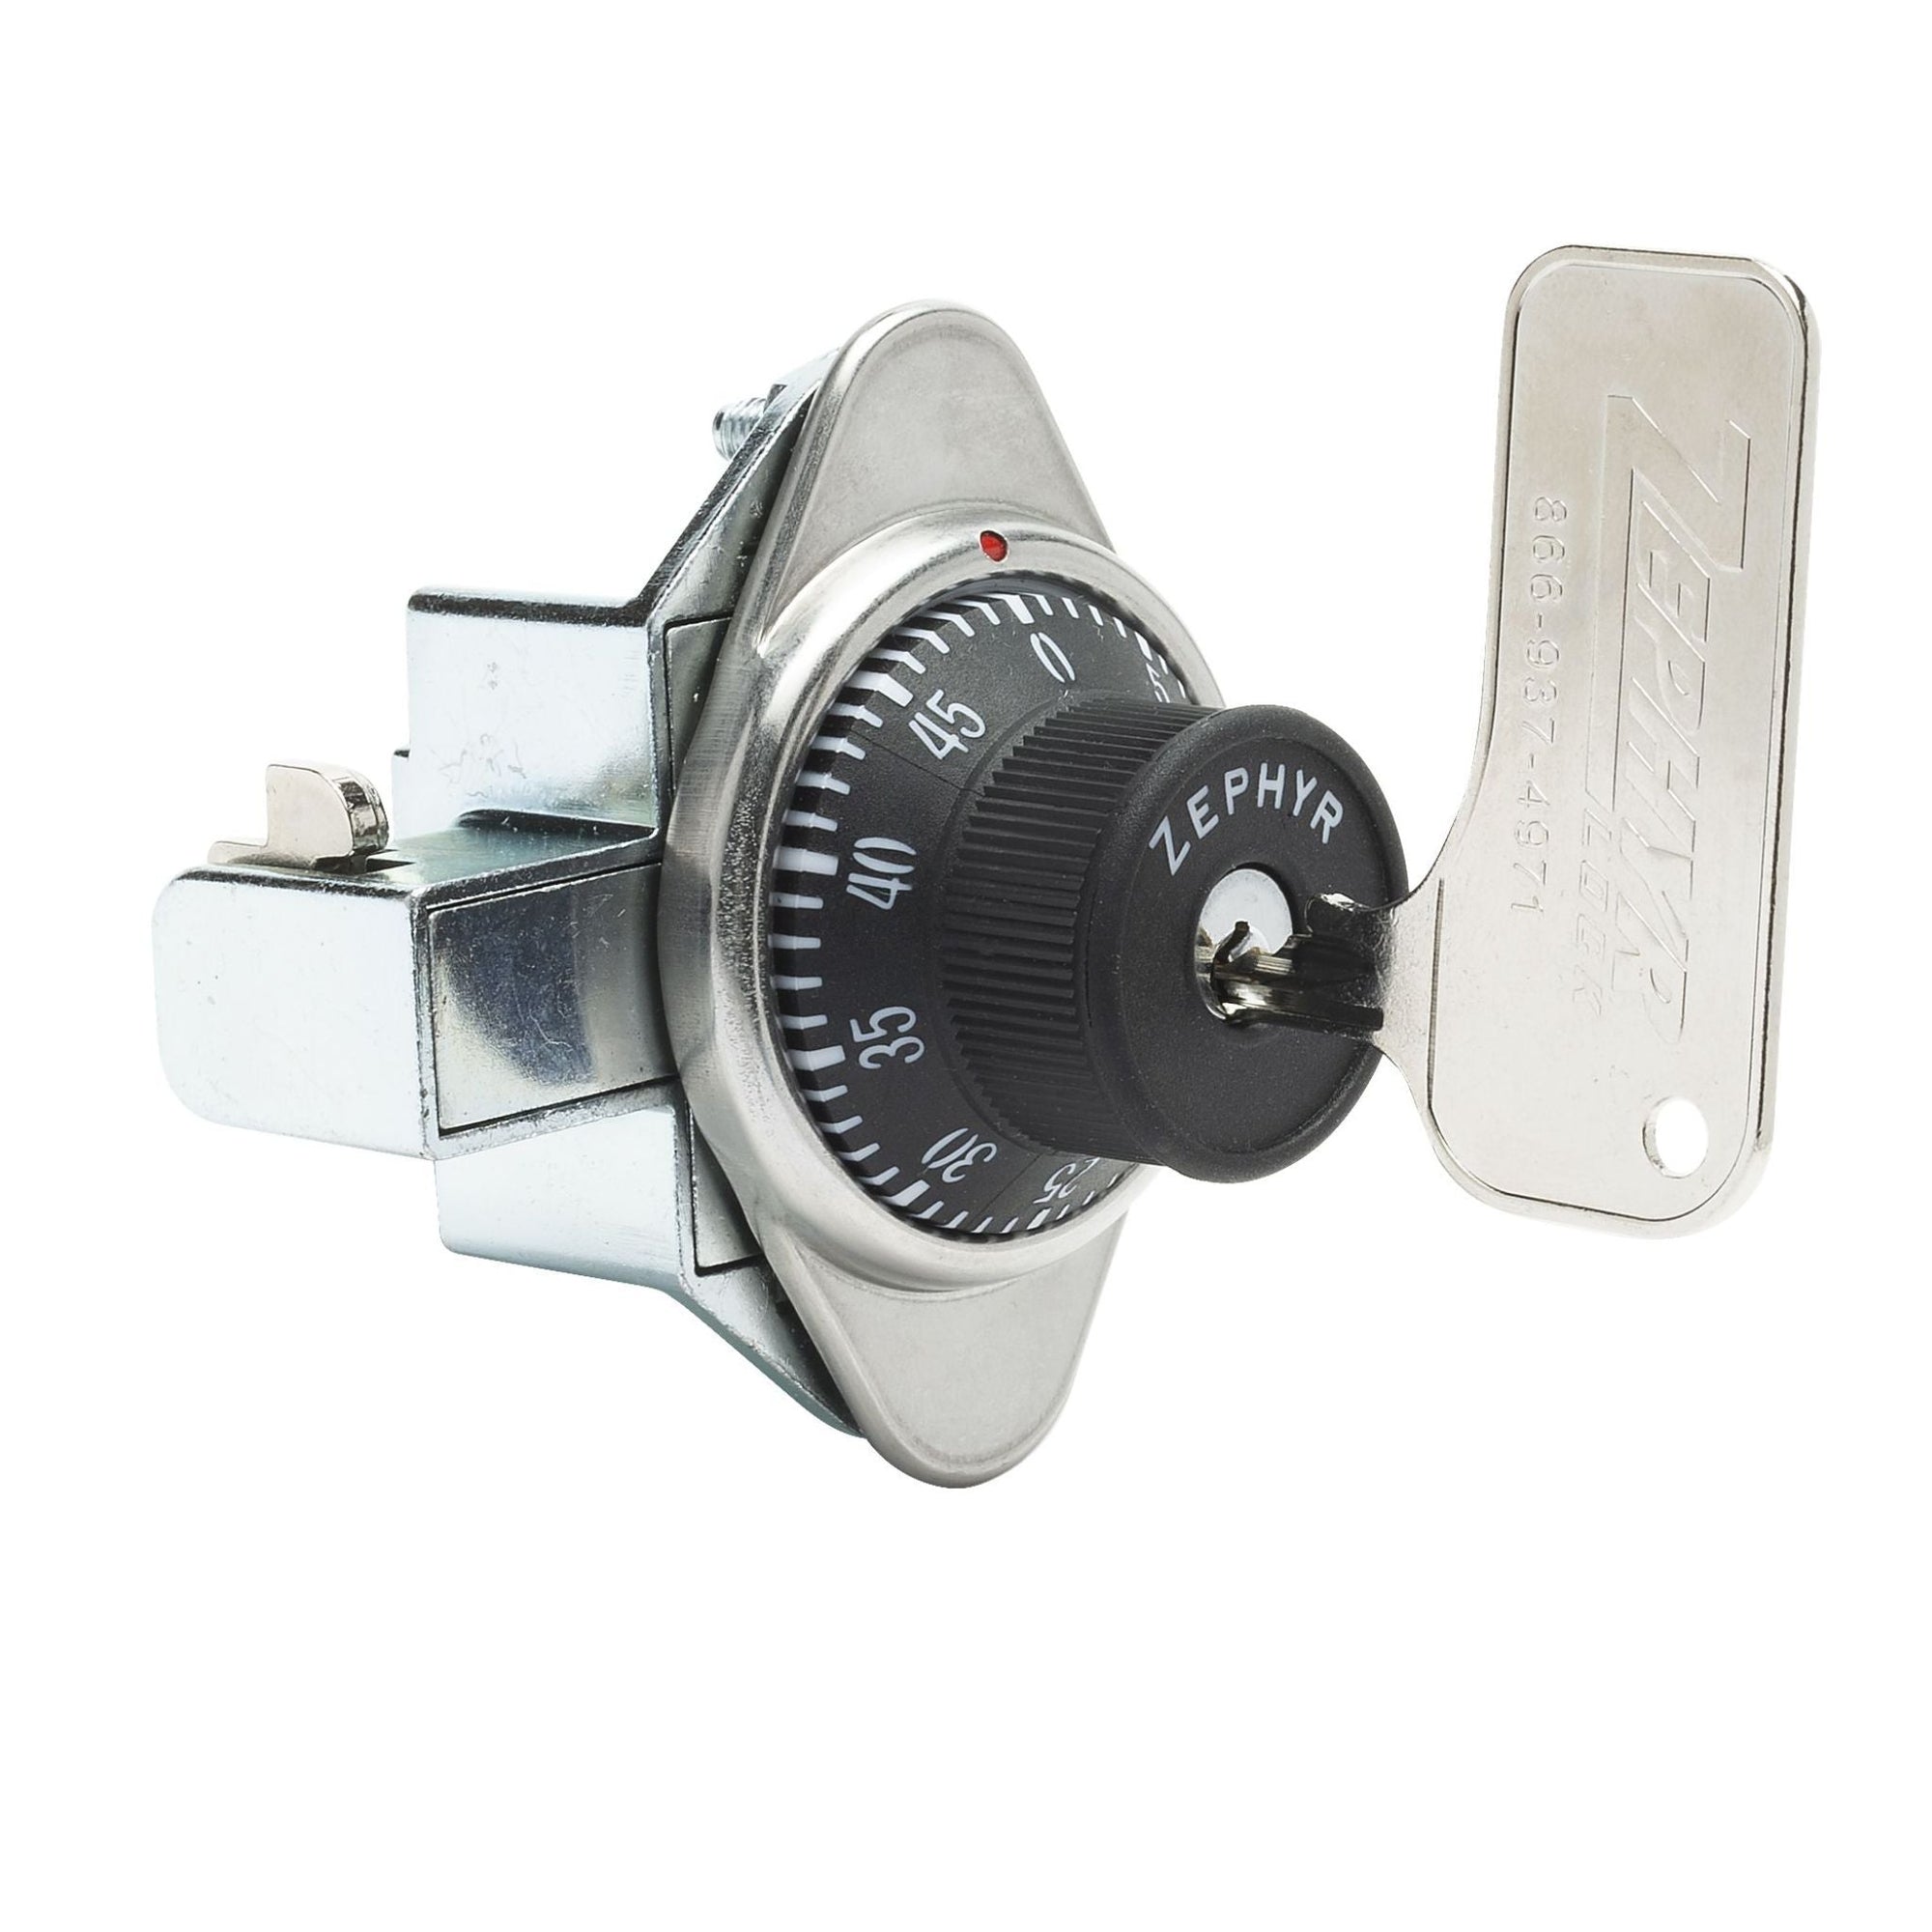 Zephyr 1992ADA RH ADA-Compliant Built-In Combination Locker Locks With Key Control Override for Supervisory Access - The Lock Source